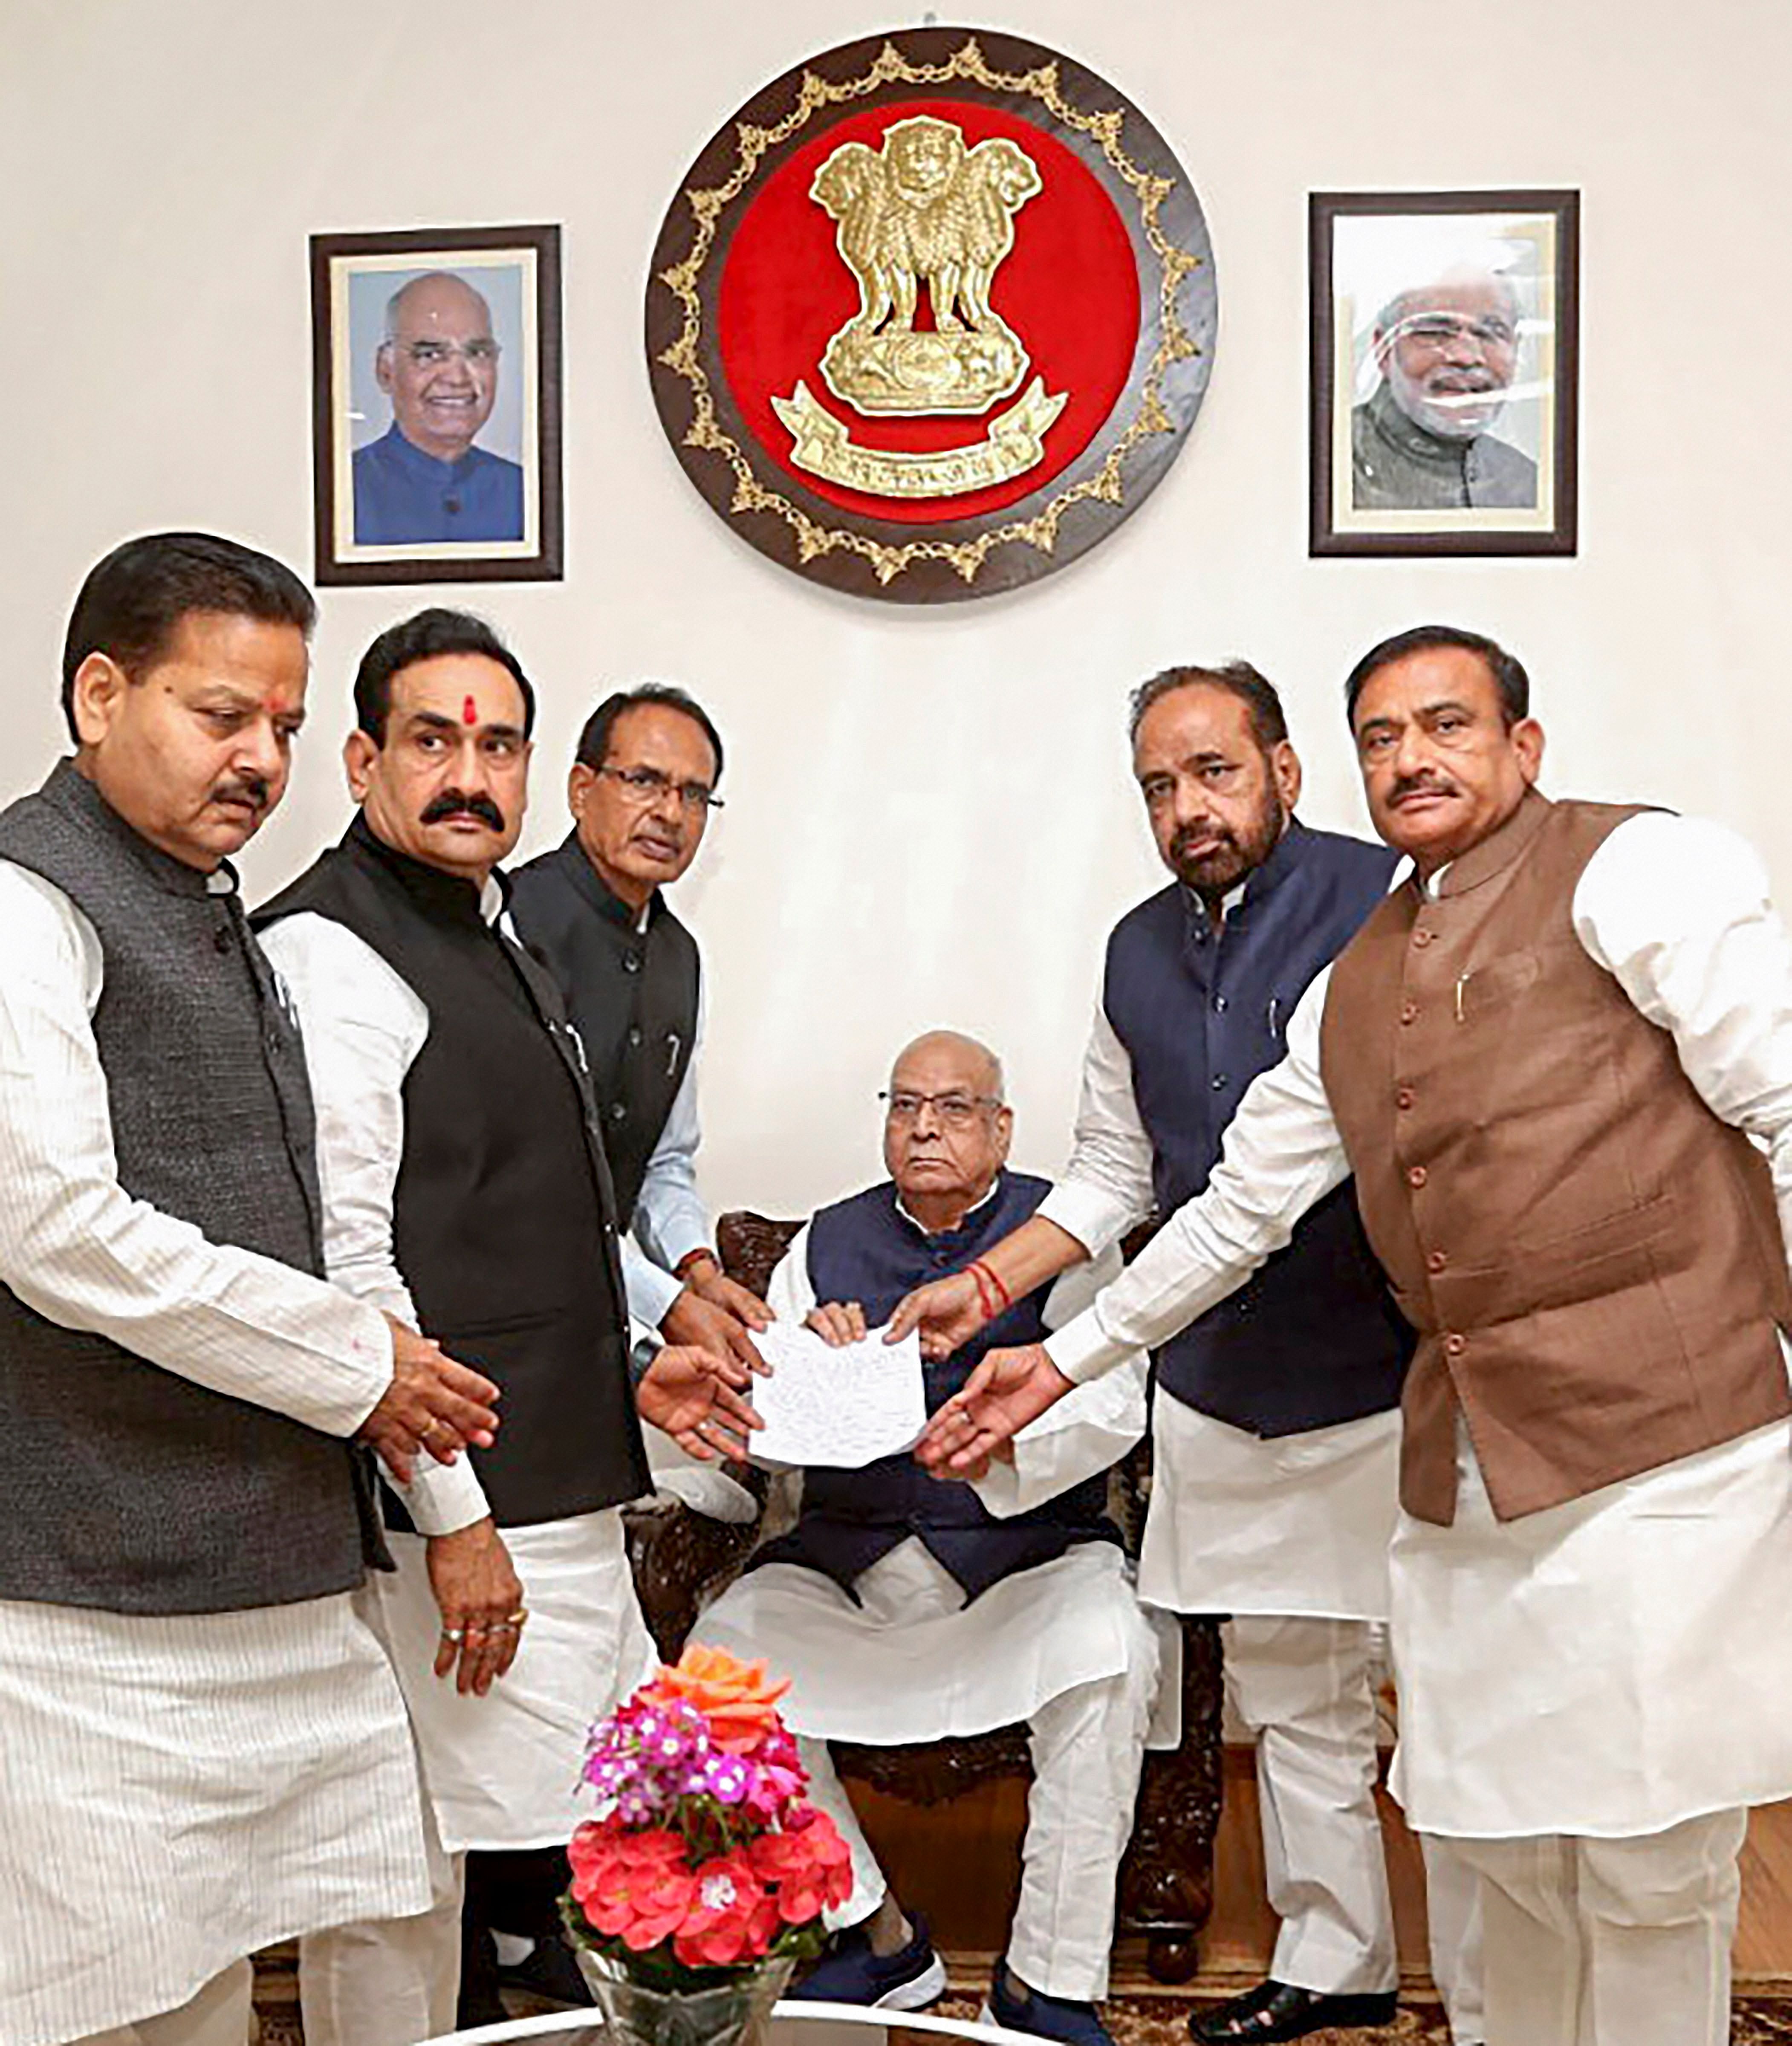 BJP National Vice President Shivraj Singh Chouhan along with leader of the opposition in the State Assembly Gopal Bhargava and party MLAs submit a memorandum demanding a floor test to MP Governor Lalji Tandon at Raj Bhavan in Bhopal.(Credit: PTI Photo)